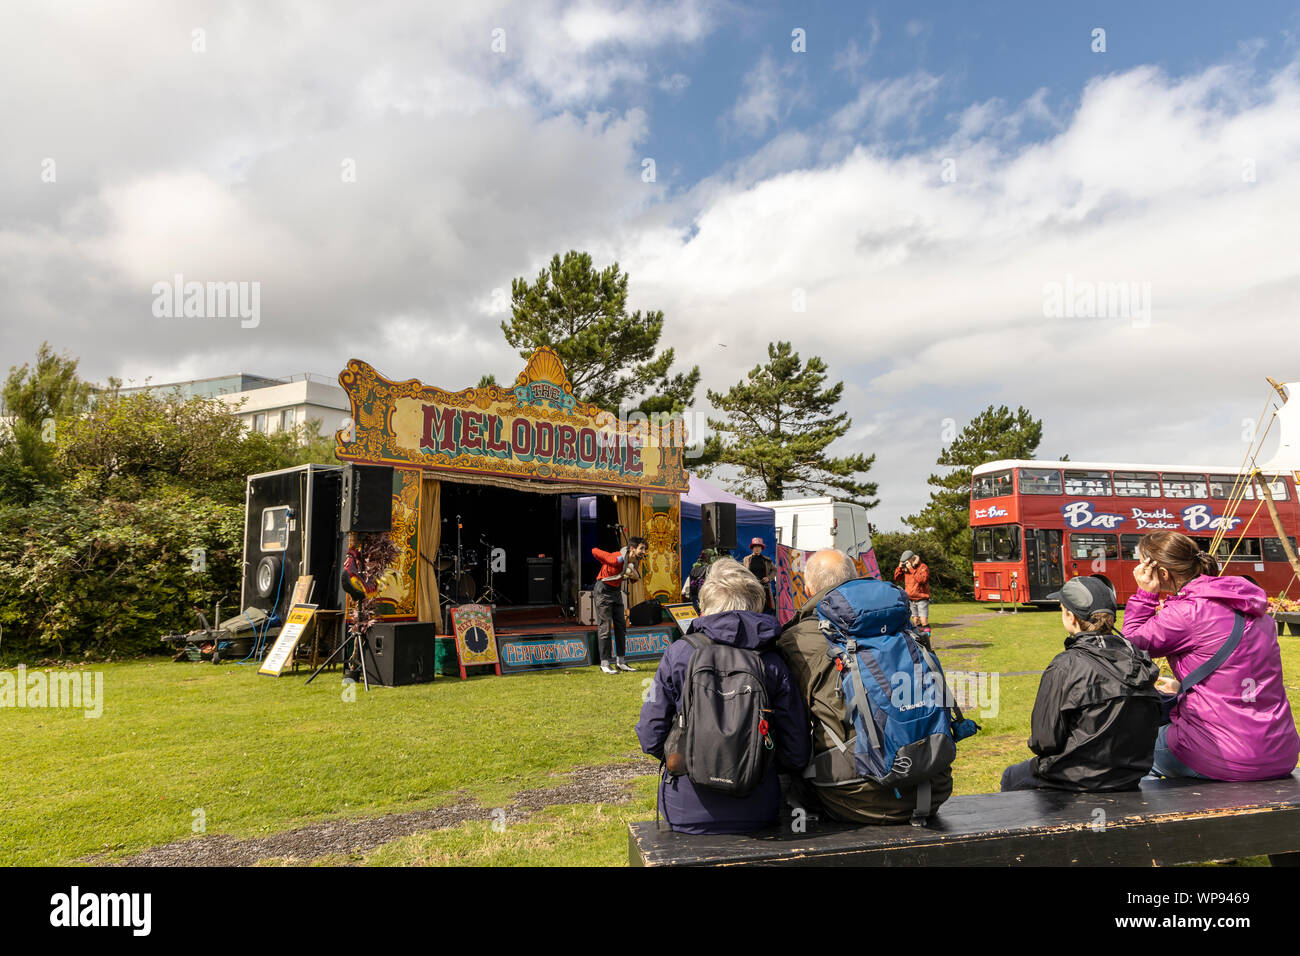 Open air concert at the Vintage By The Sea Festival in coastal resort of Morecambe, England. Stock Photo